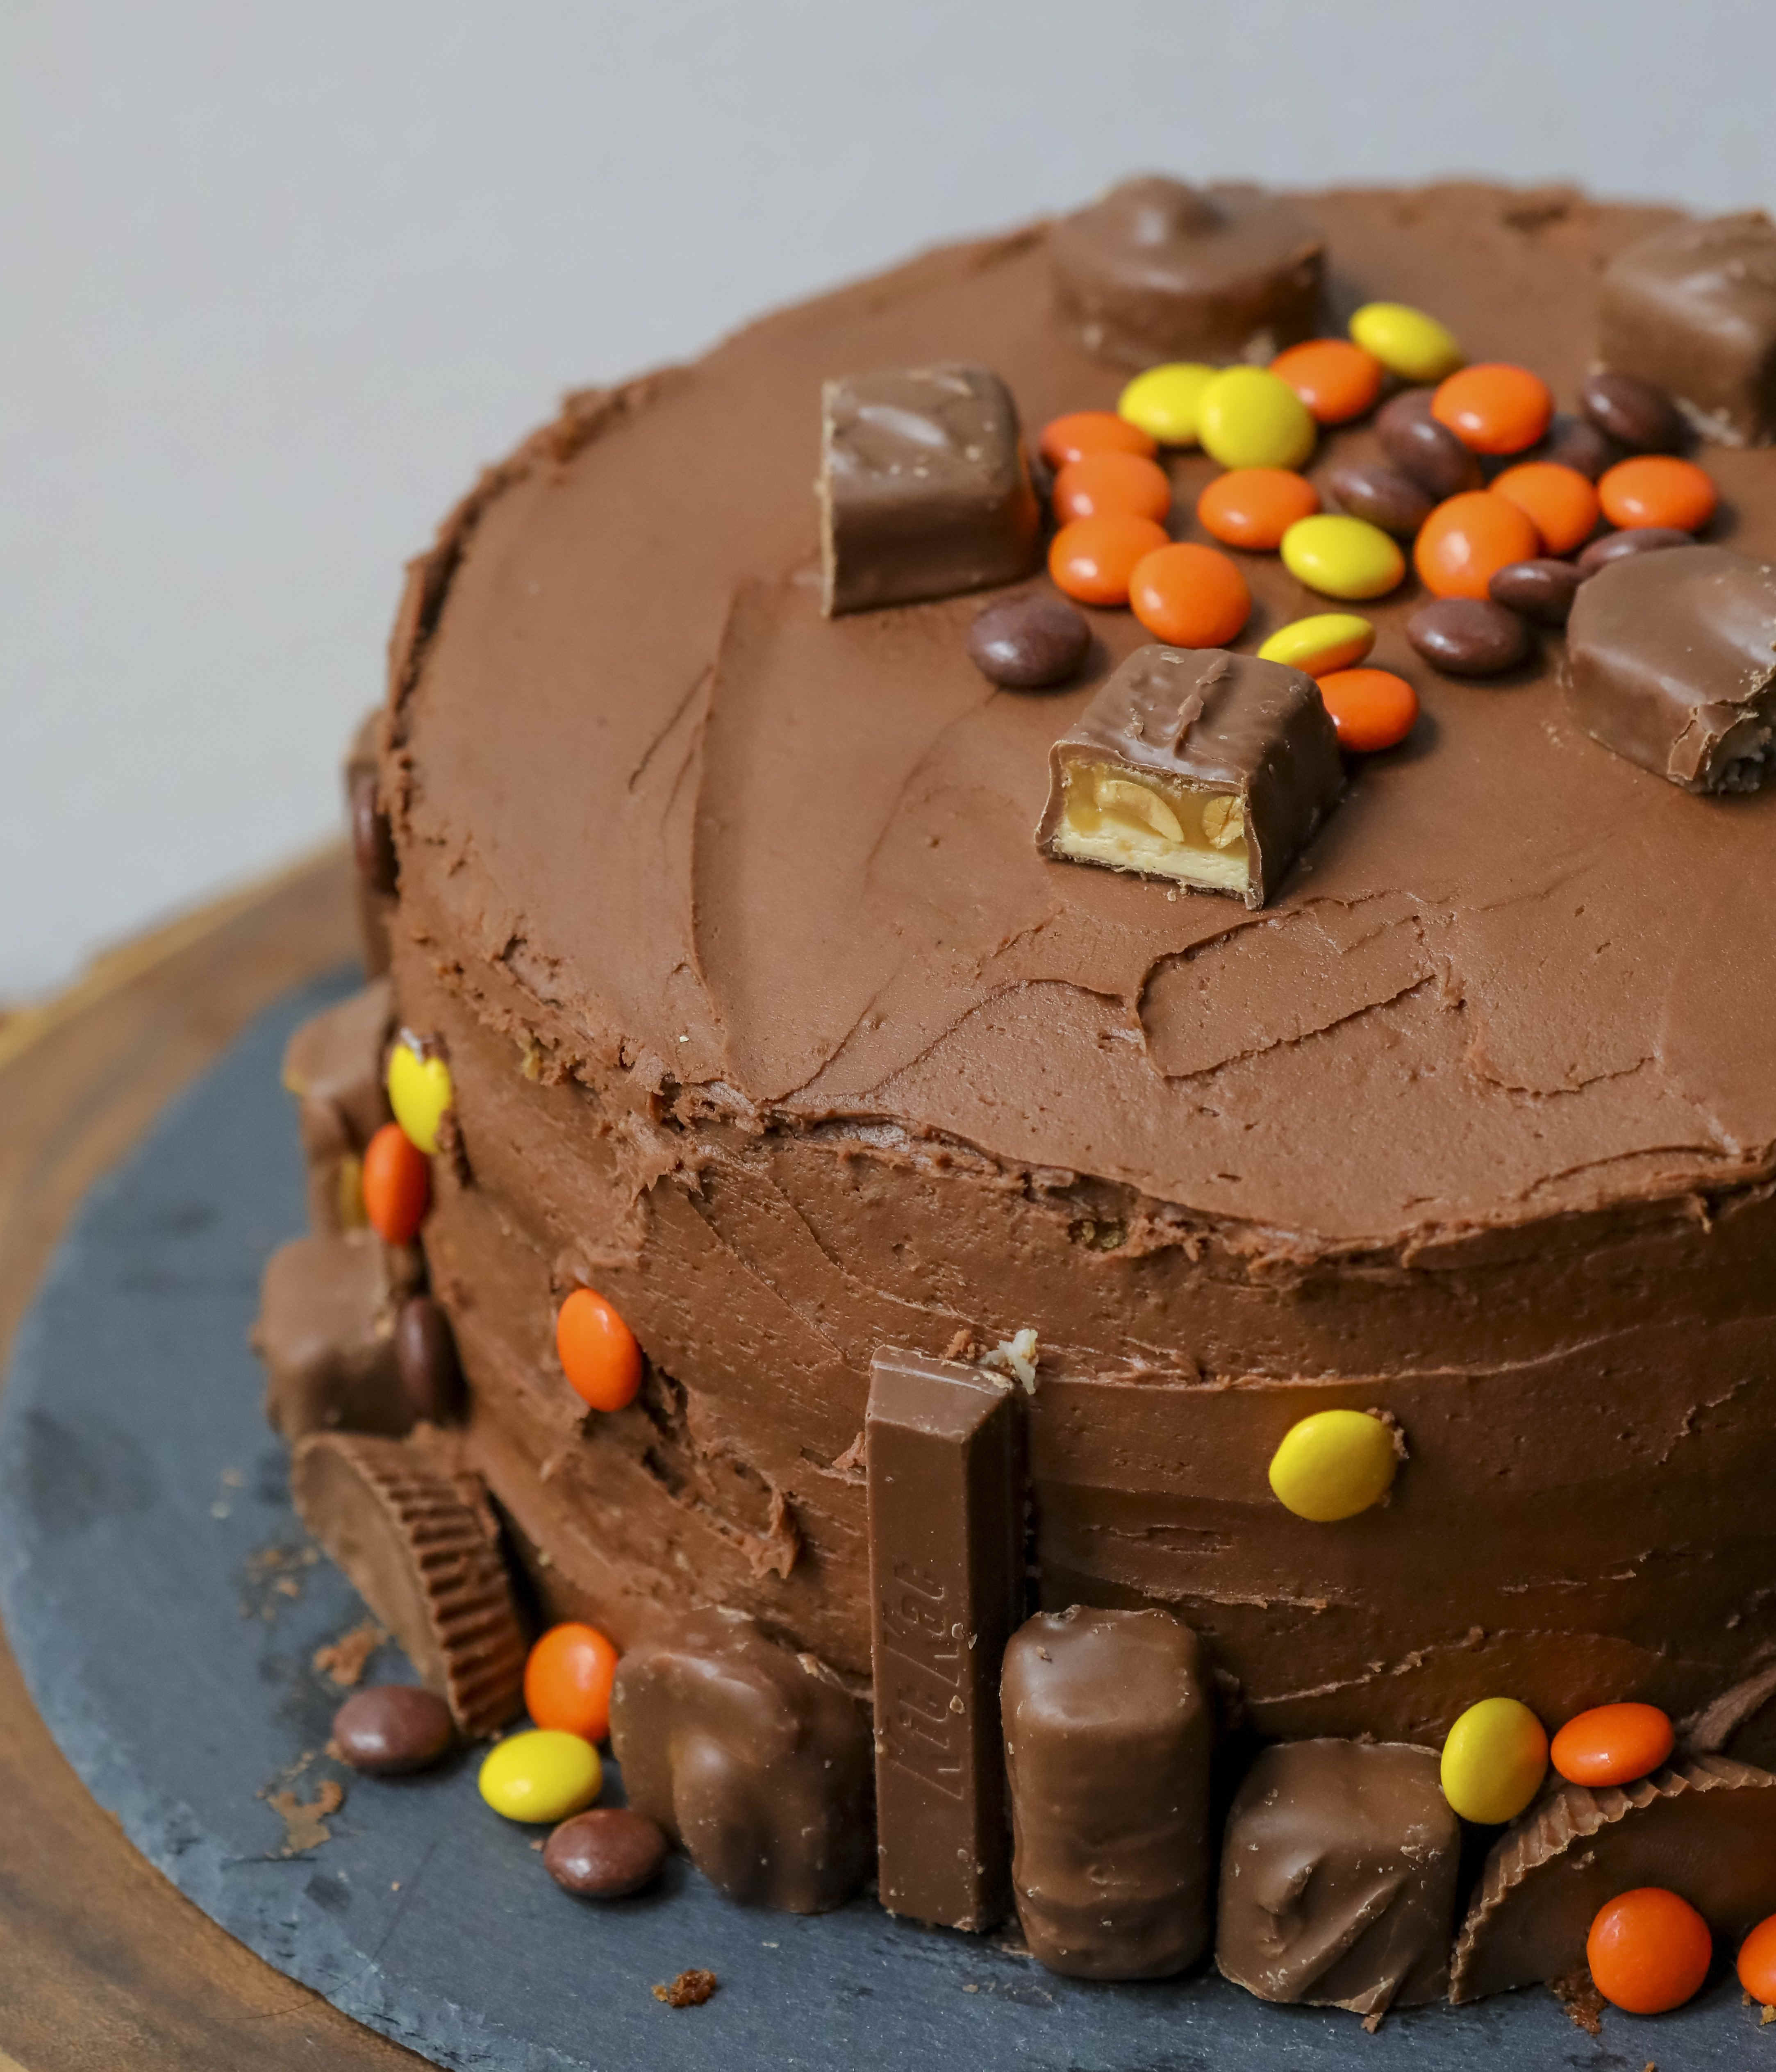 Recipes Candy Bar Cakes And Treats Make Good Use Of Leftover Halloween Candy